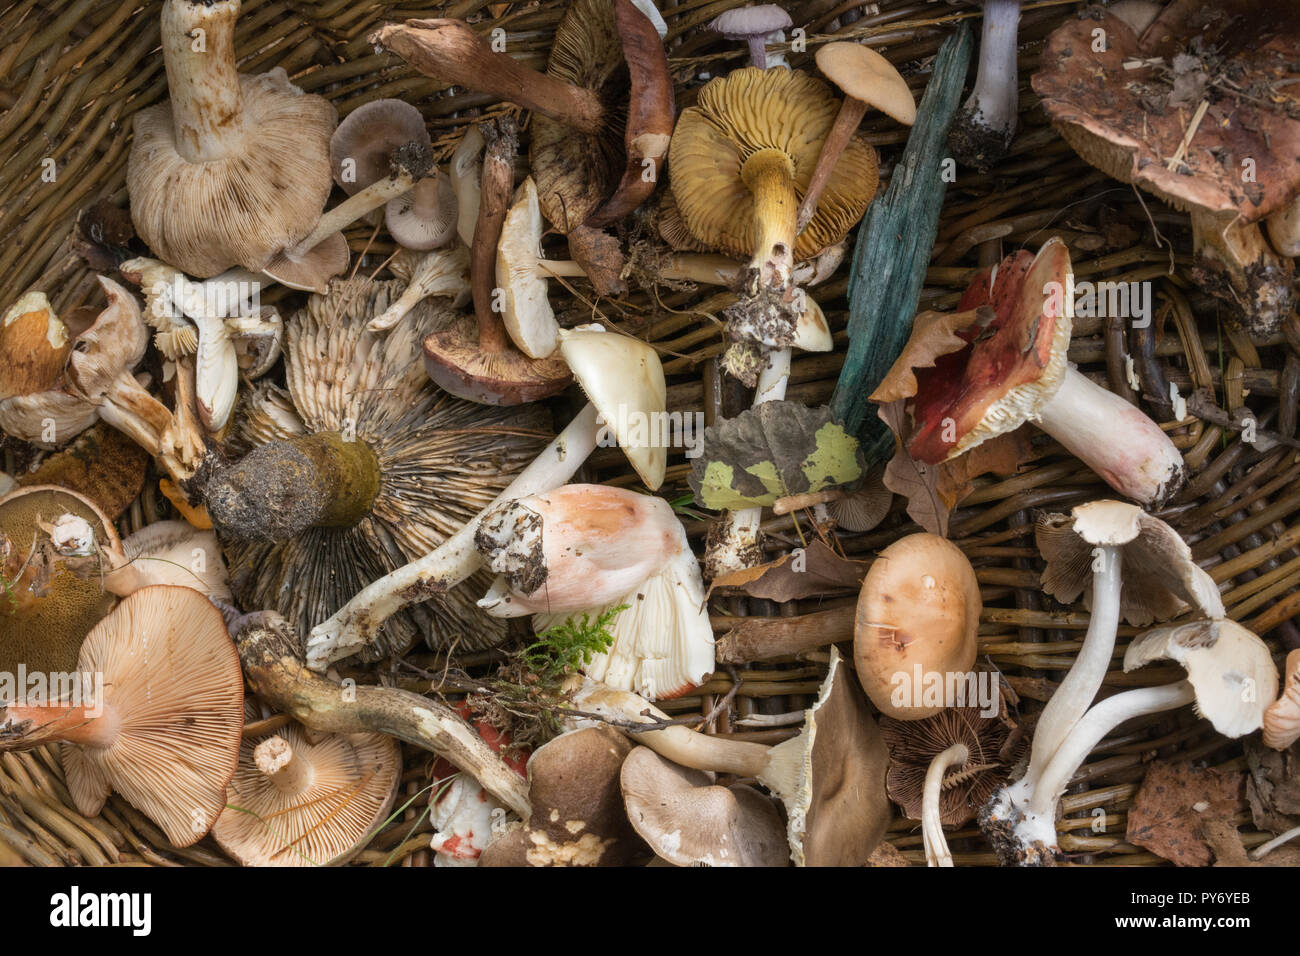 Basket containing a variety of fungi, toadstools, mushrooms, collected during a fungus foray during autumn, for identification and education Stock Photo